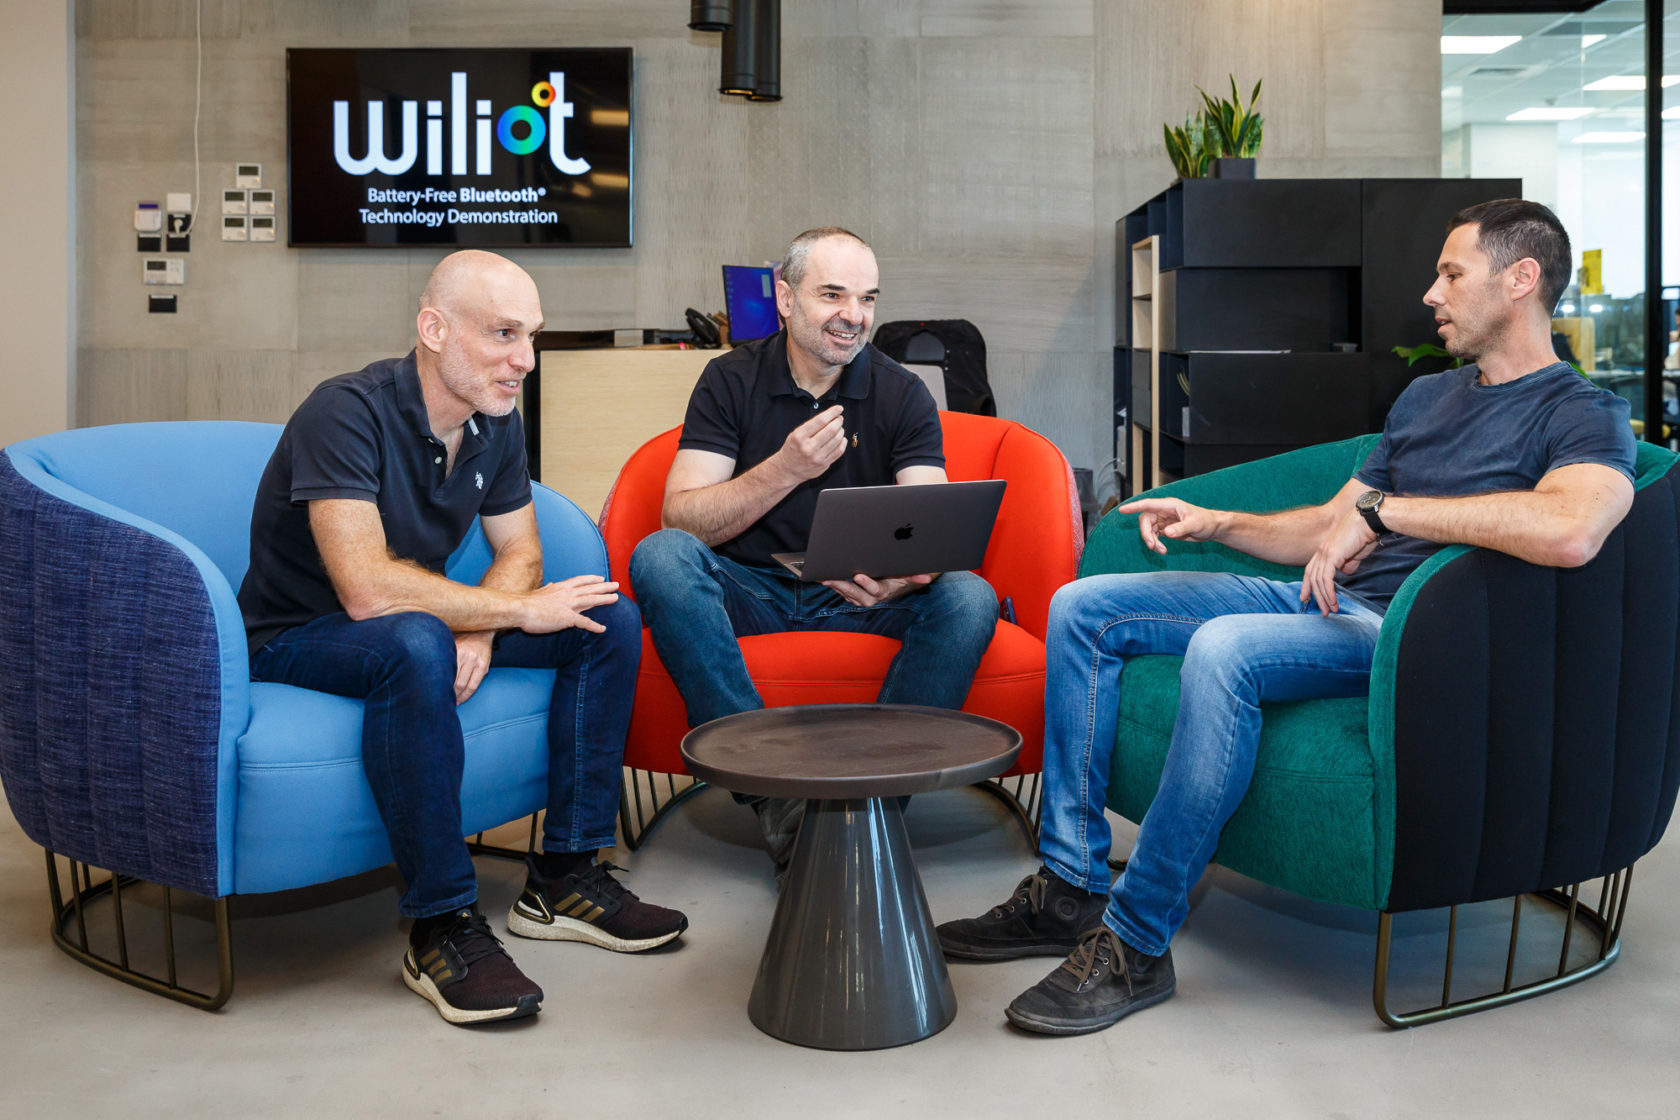 Wiliot's CEO, Tal Tamir Chosen as One of the Most Influential Figures in the Chip Industry